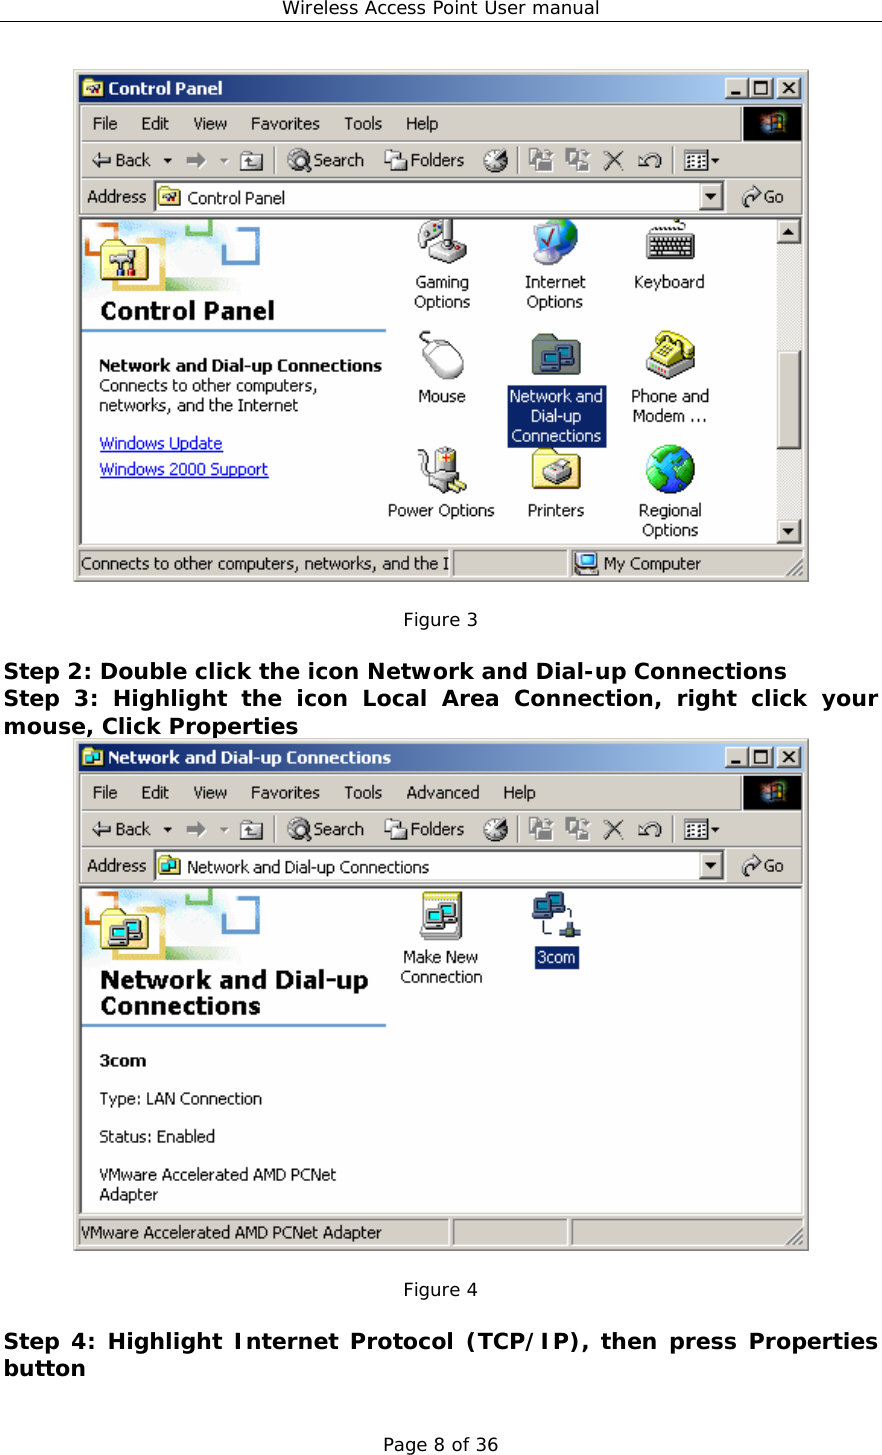 Wireless Access Point User manual Page 8 of 36   Figure 3  Step 2: Double click the icon Network and Dial-up Connections Step 3: Highlight the icon Local Area Connection, right click your mouse, Click Properties   Figure 4  Step 4: Highlight Internet Protocol (TCP/IP), then press Properties button 